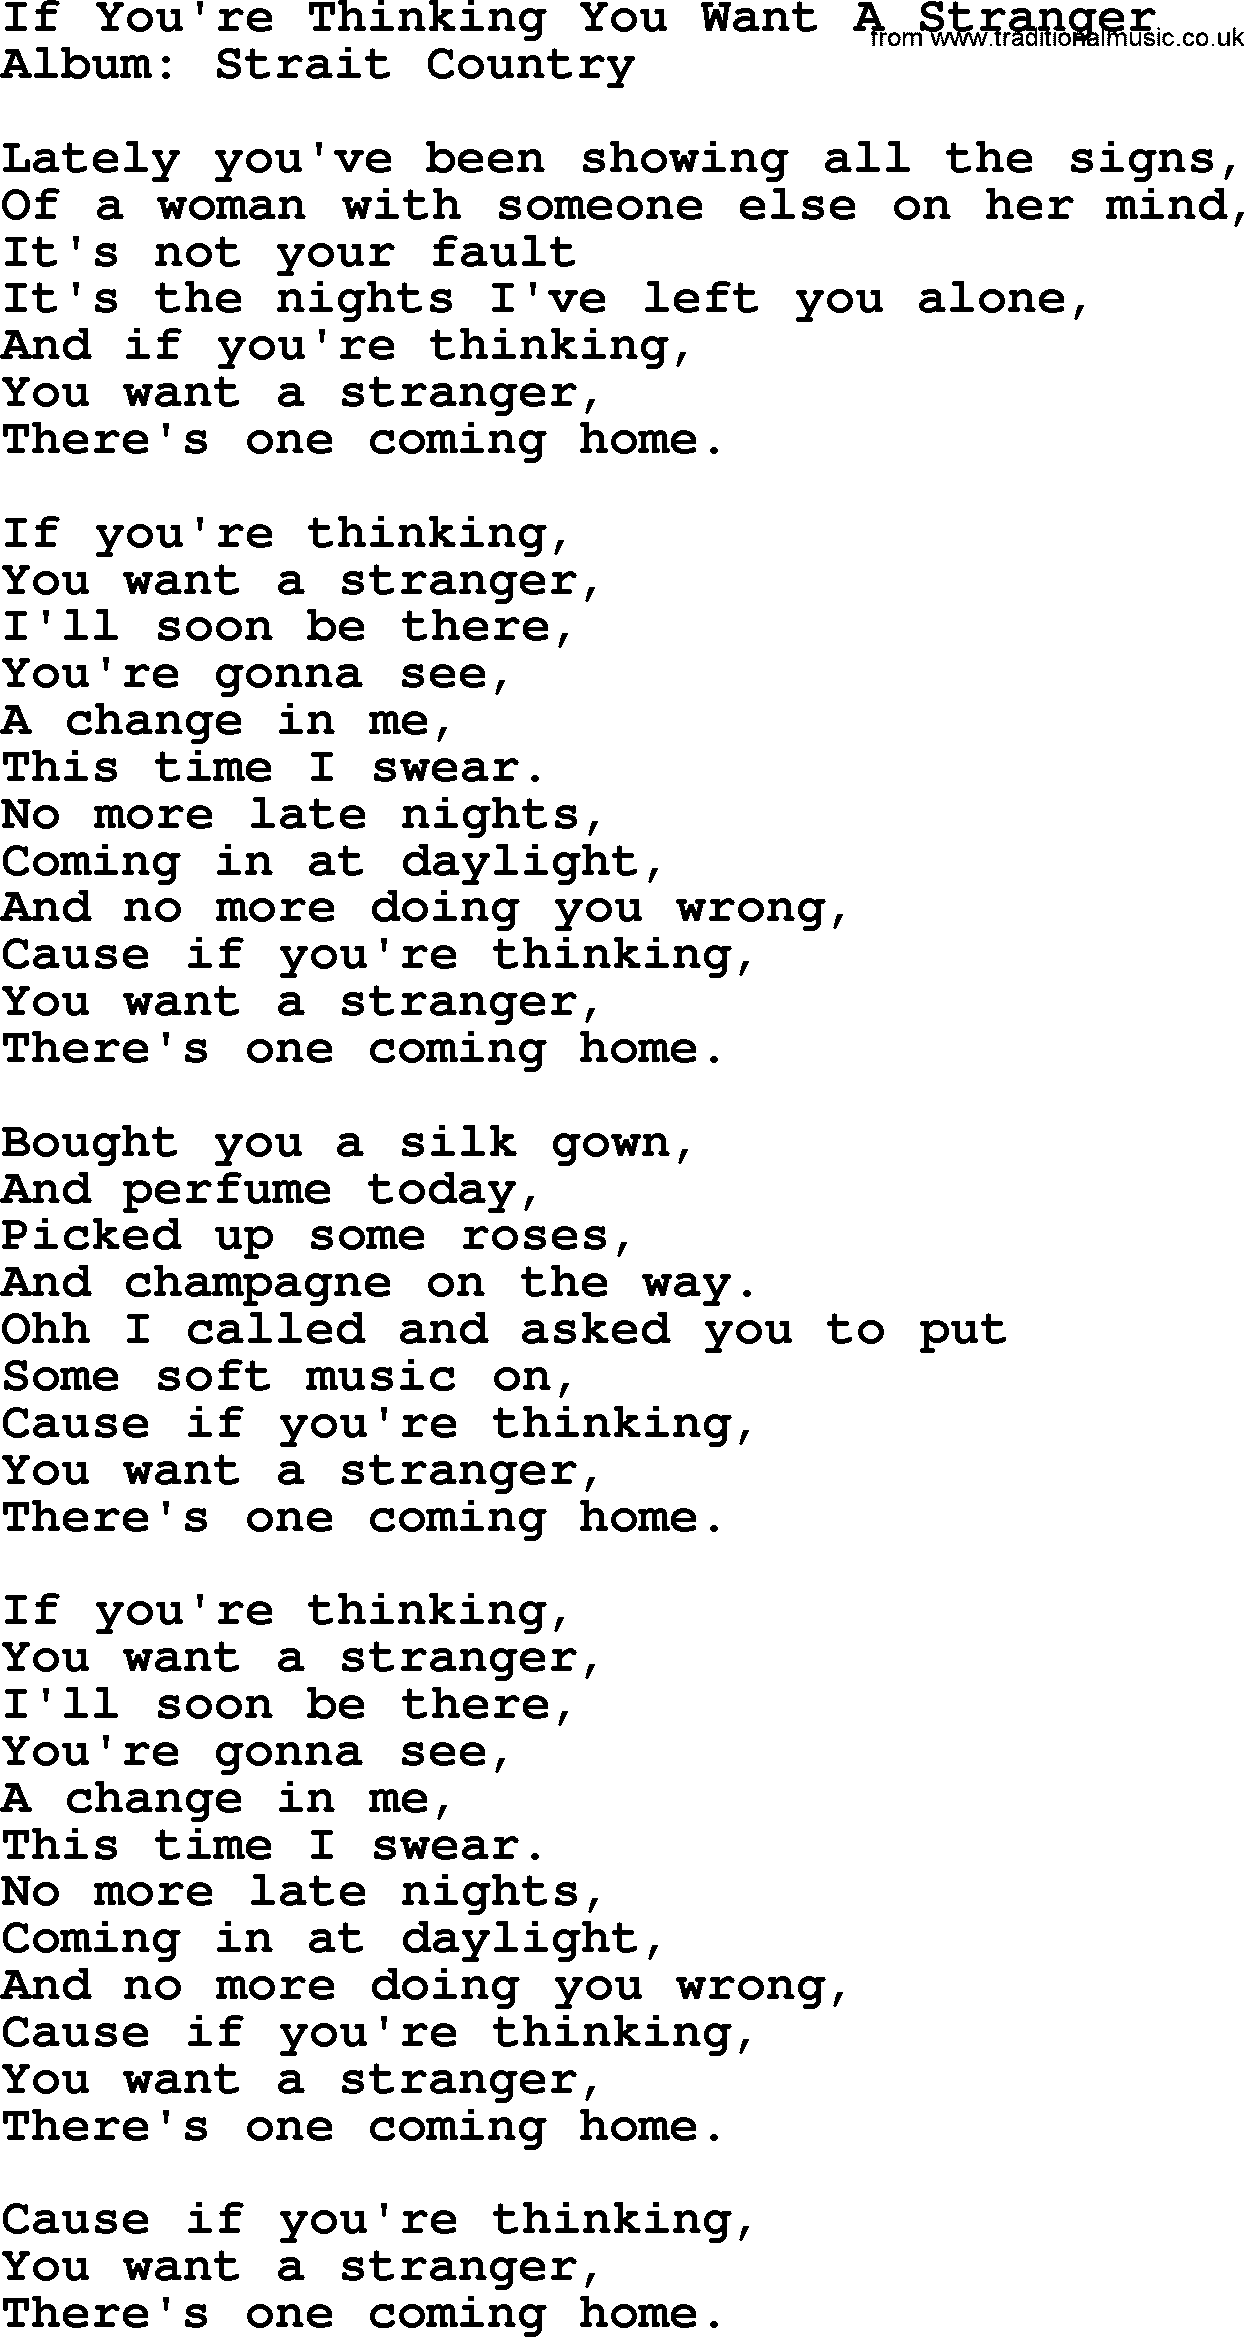 George Strait song: If You're Thinking You Want A Stranger, lyrics